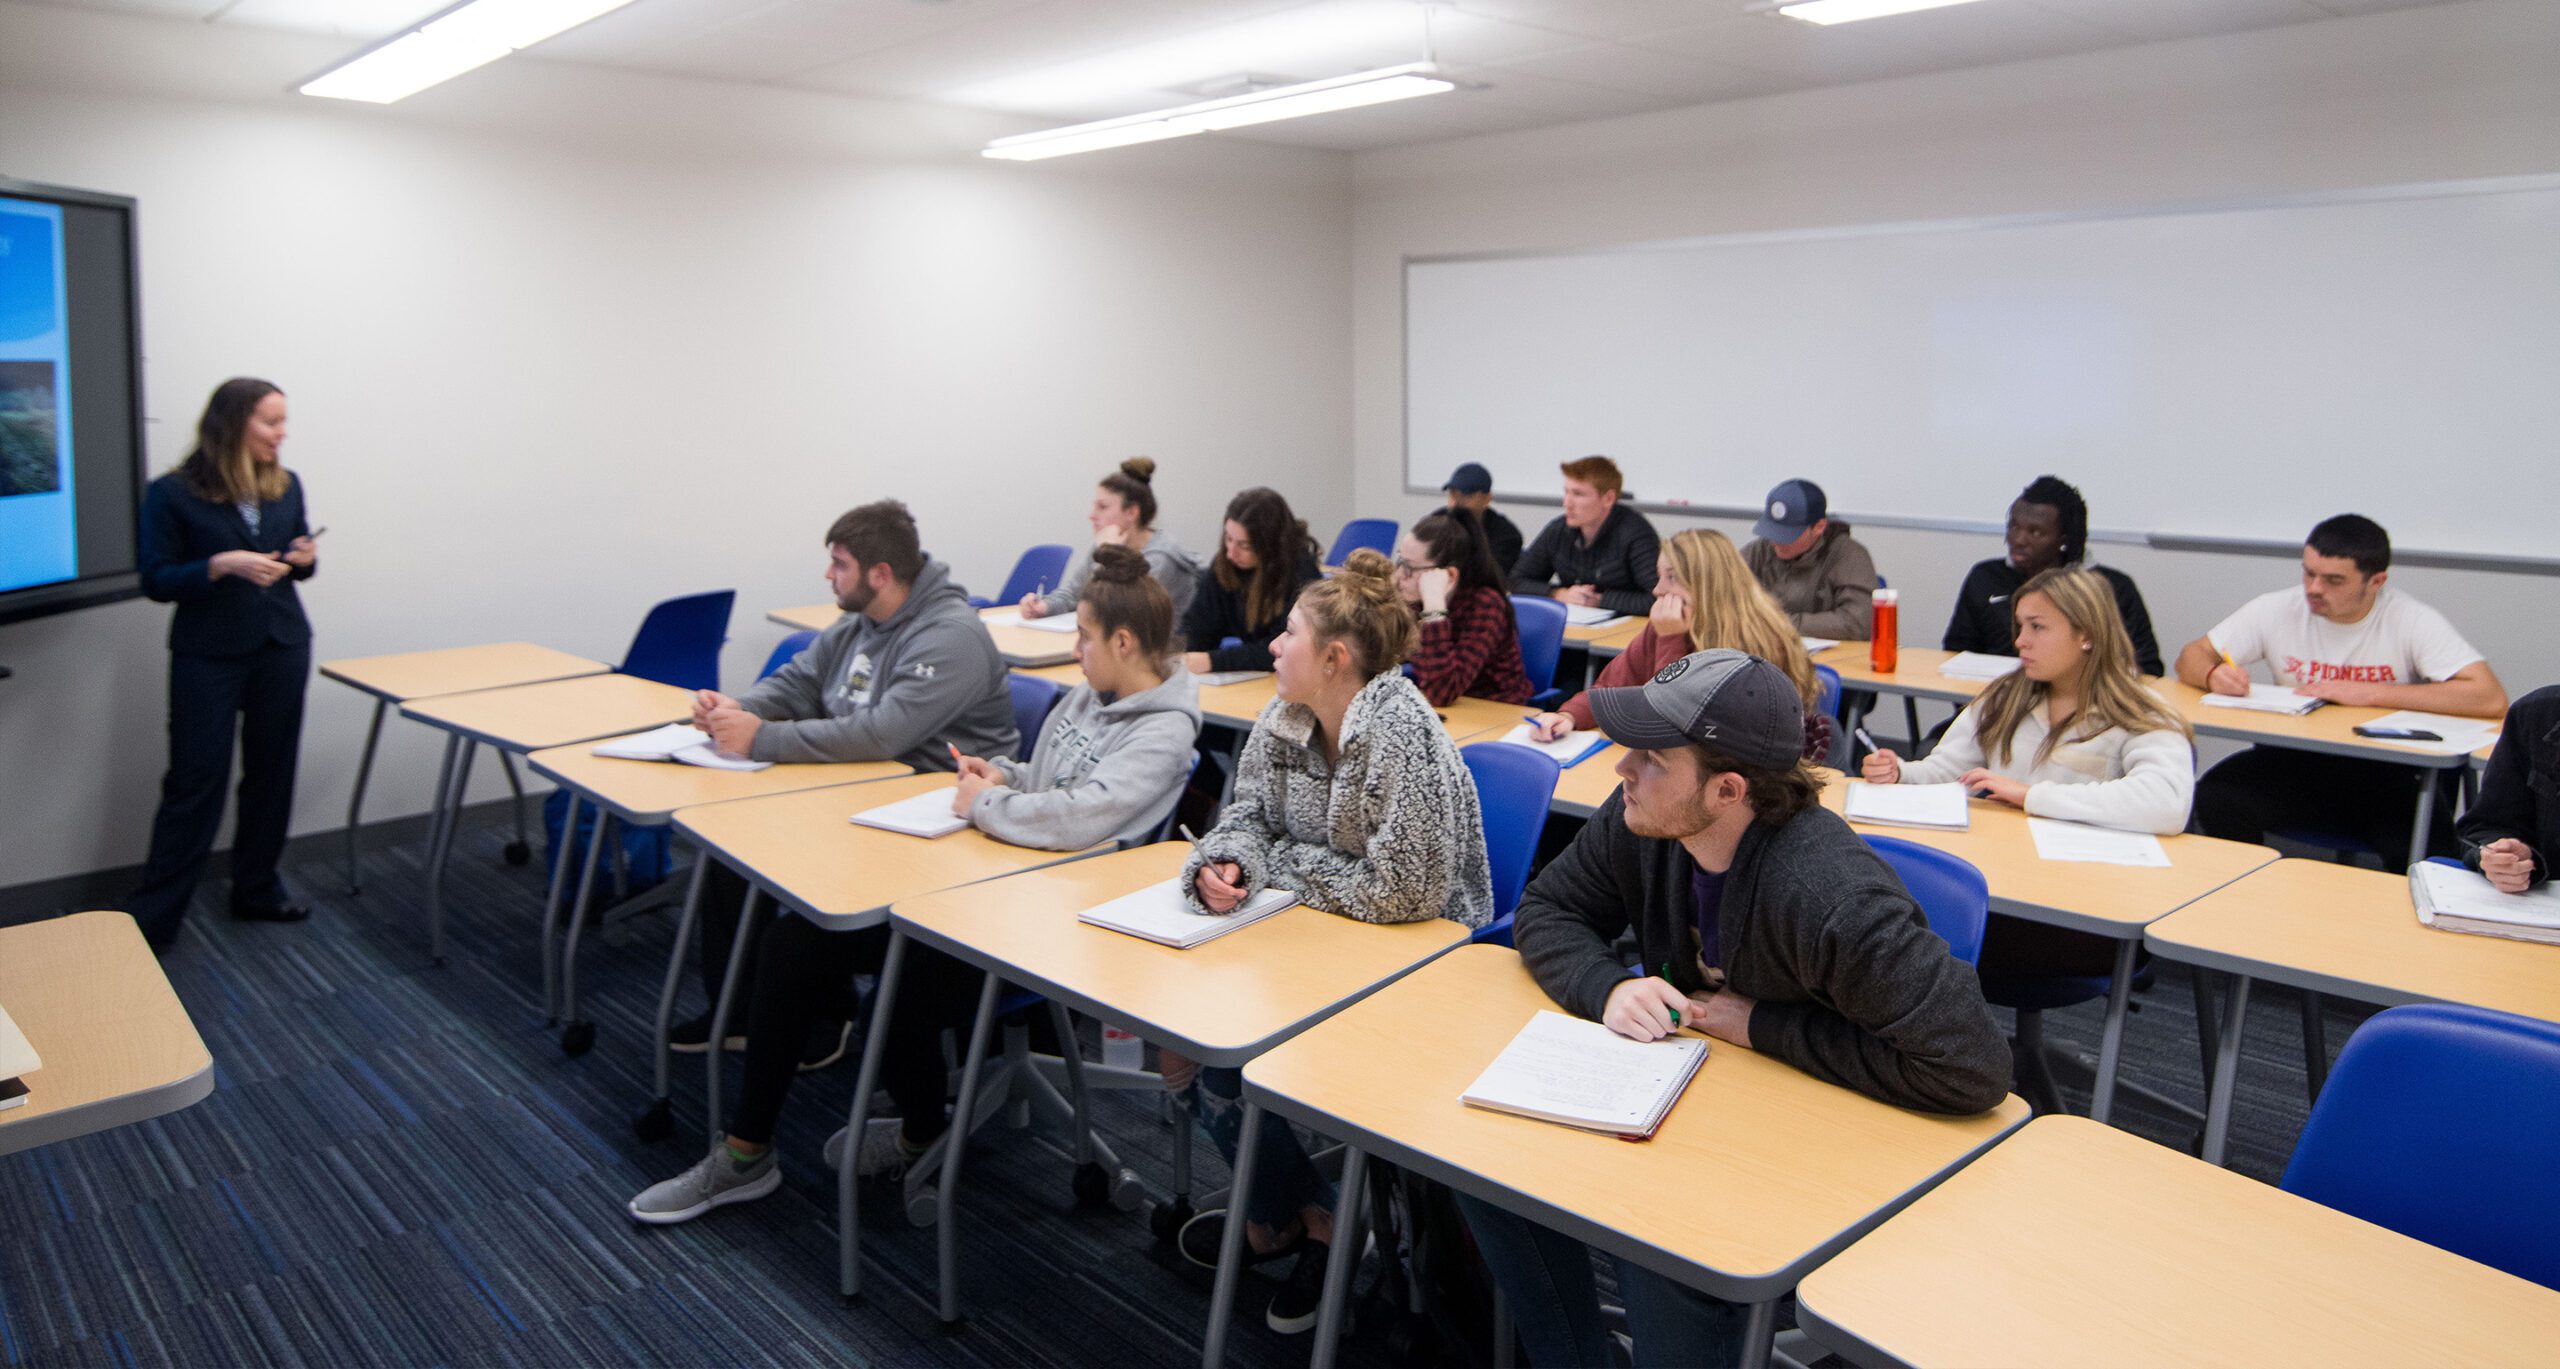 Classroom with students and professors at Assumption University in Worcester, Massachusetts.